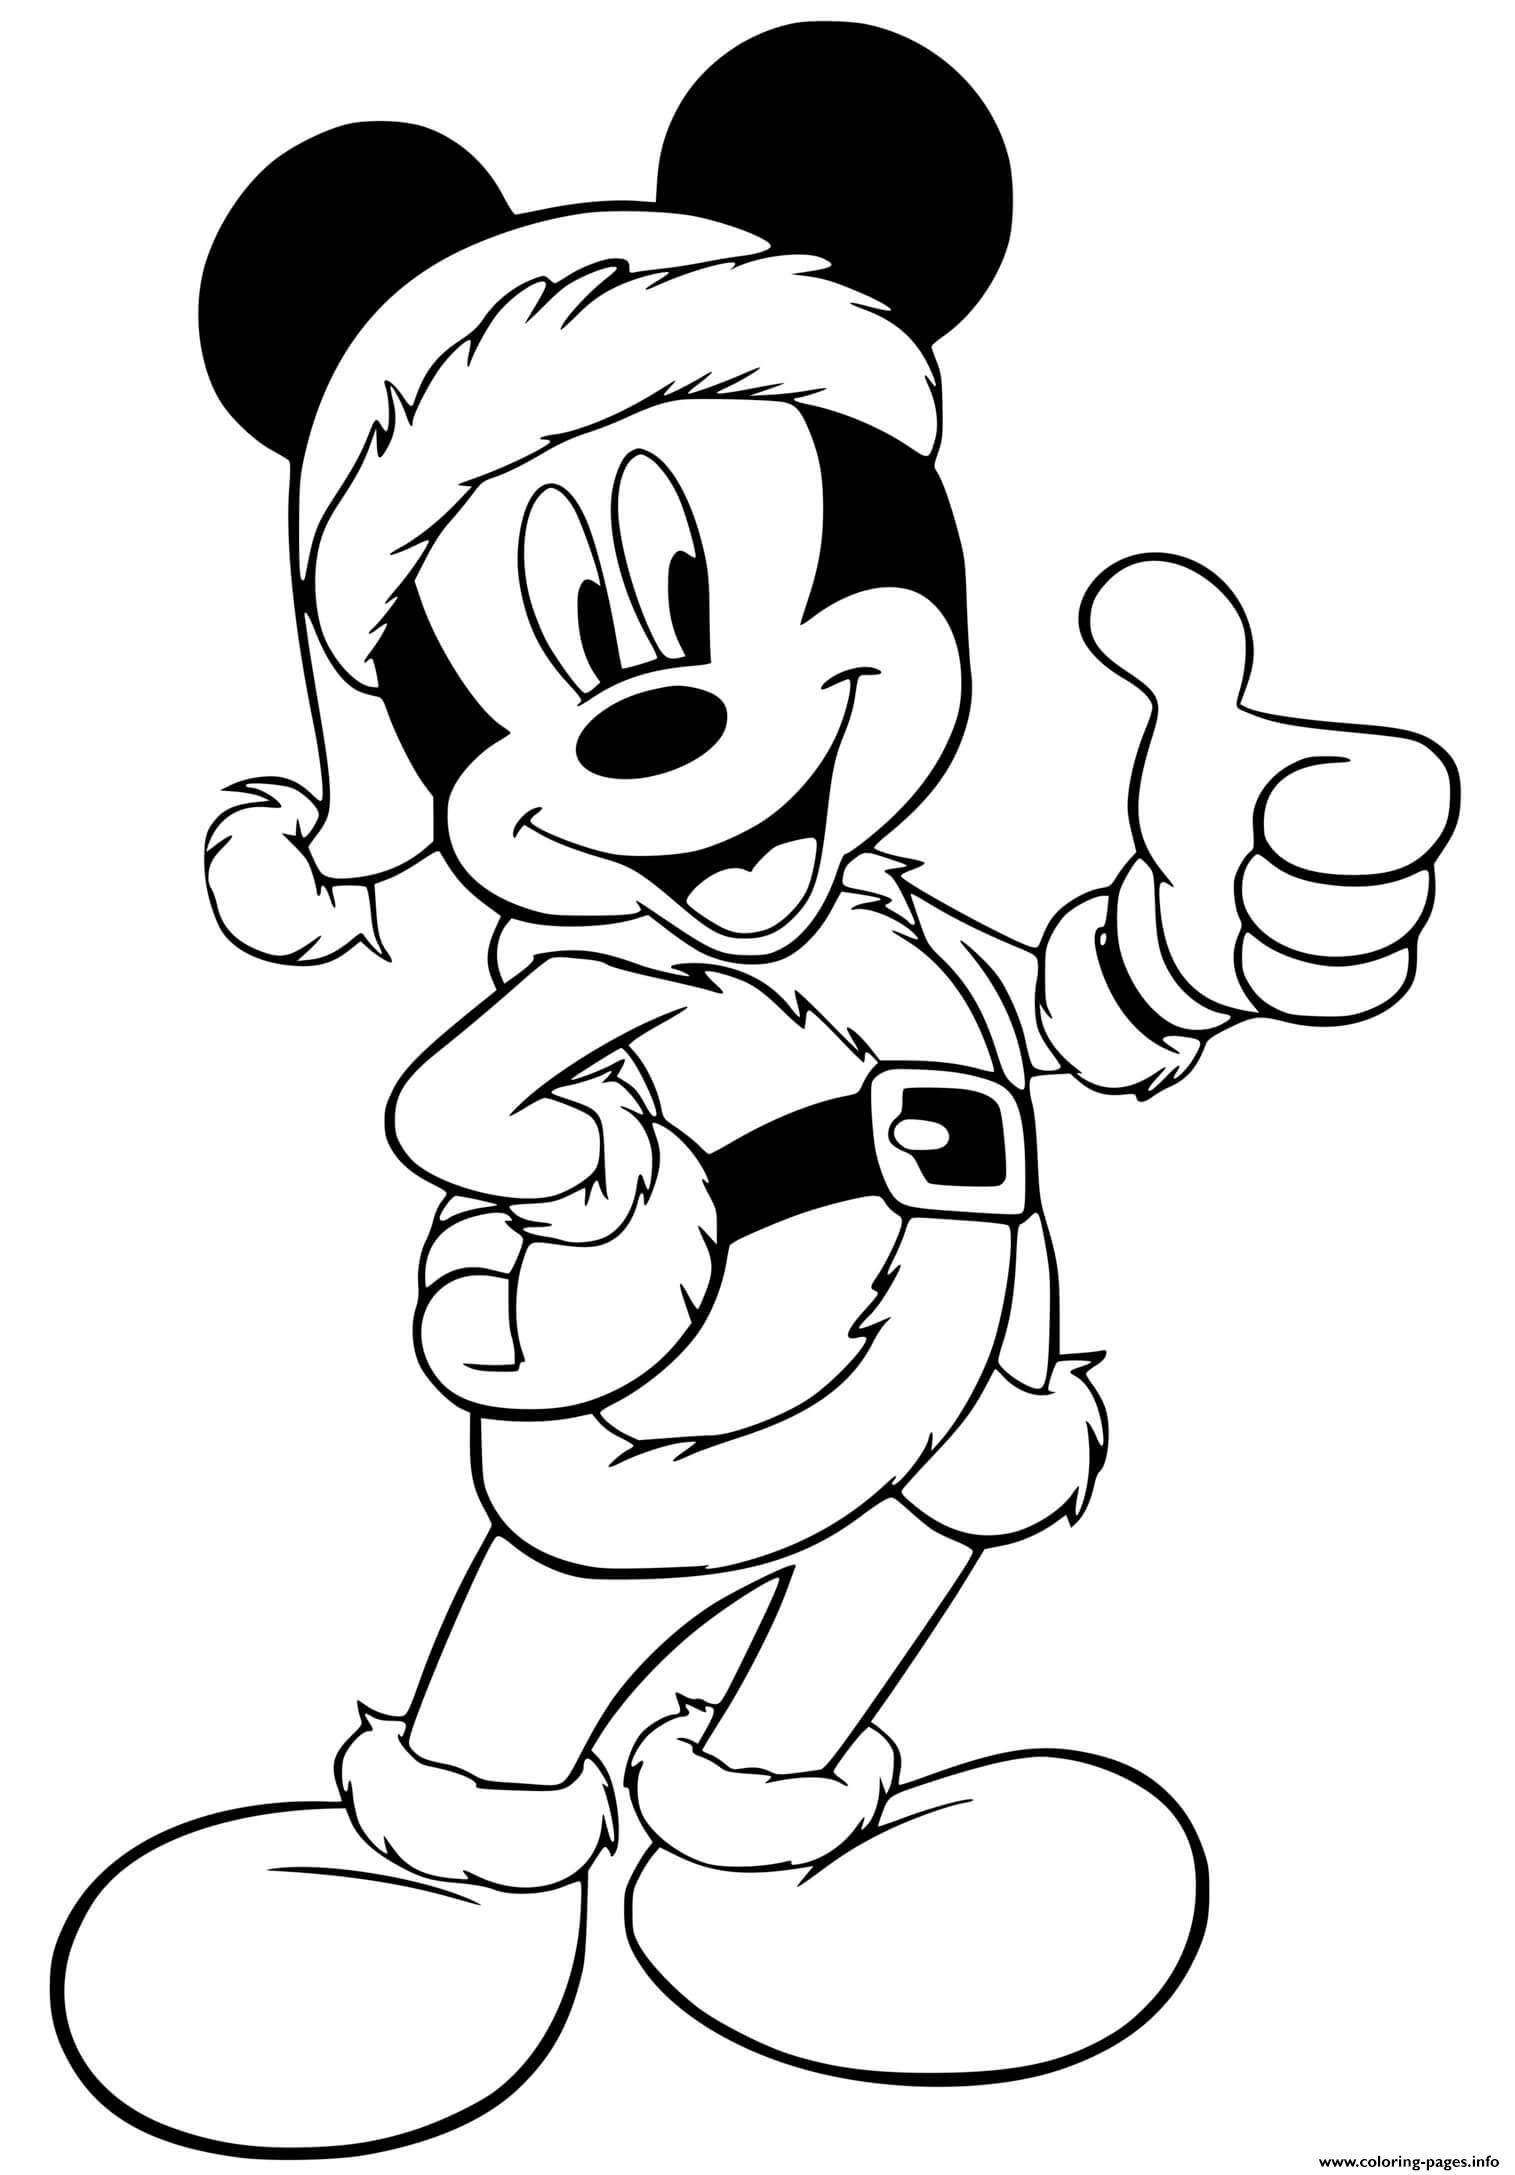 Mickey Giving Thumbs Up coloring